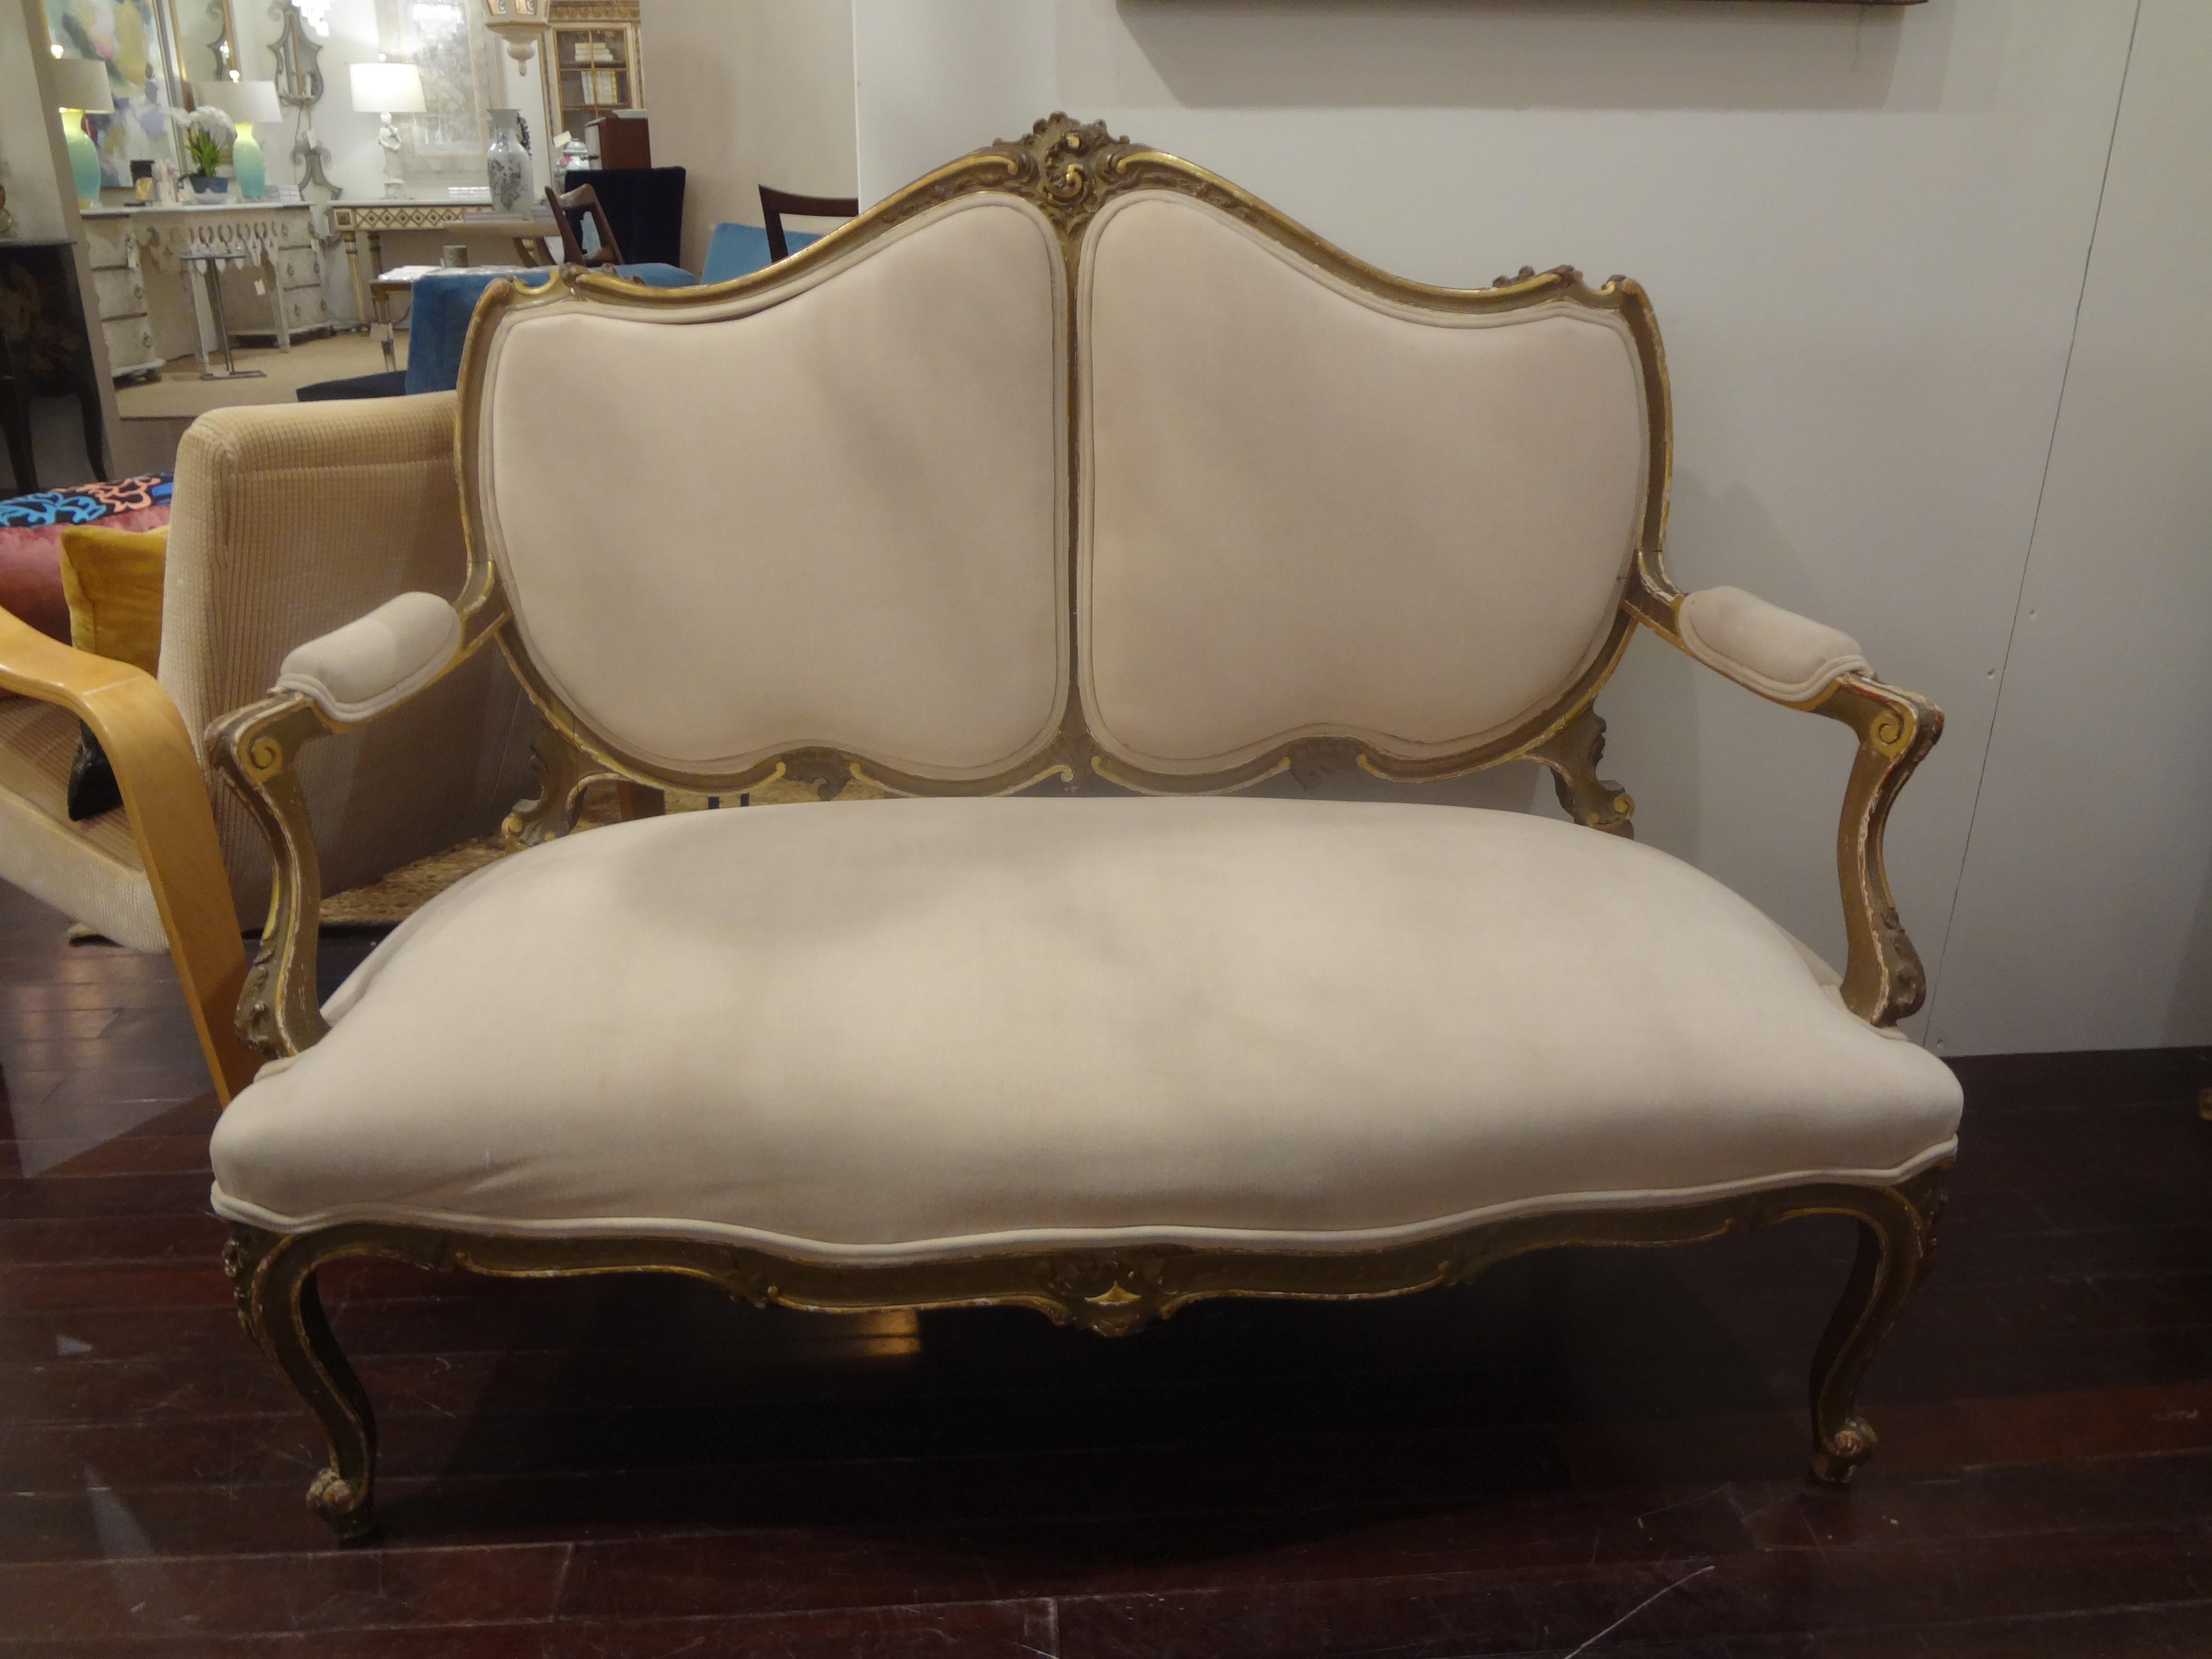 19th century Italian Louis XV style giltwood loveseat.
Lovely 19th century Italian Louis XV style giltwood loveseat, sofa, canapé or settee. This antique sofa would work well in an entrance hall, living area, dressing room or bedroom. This stylish